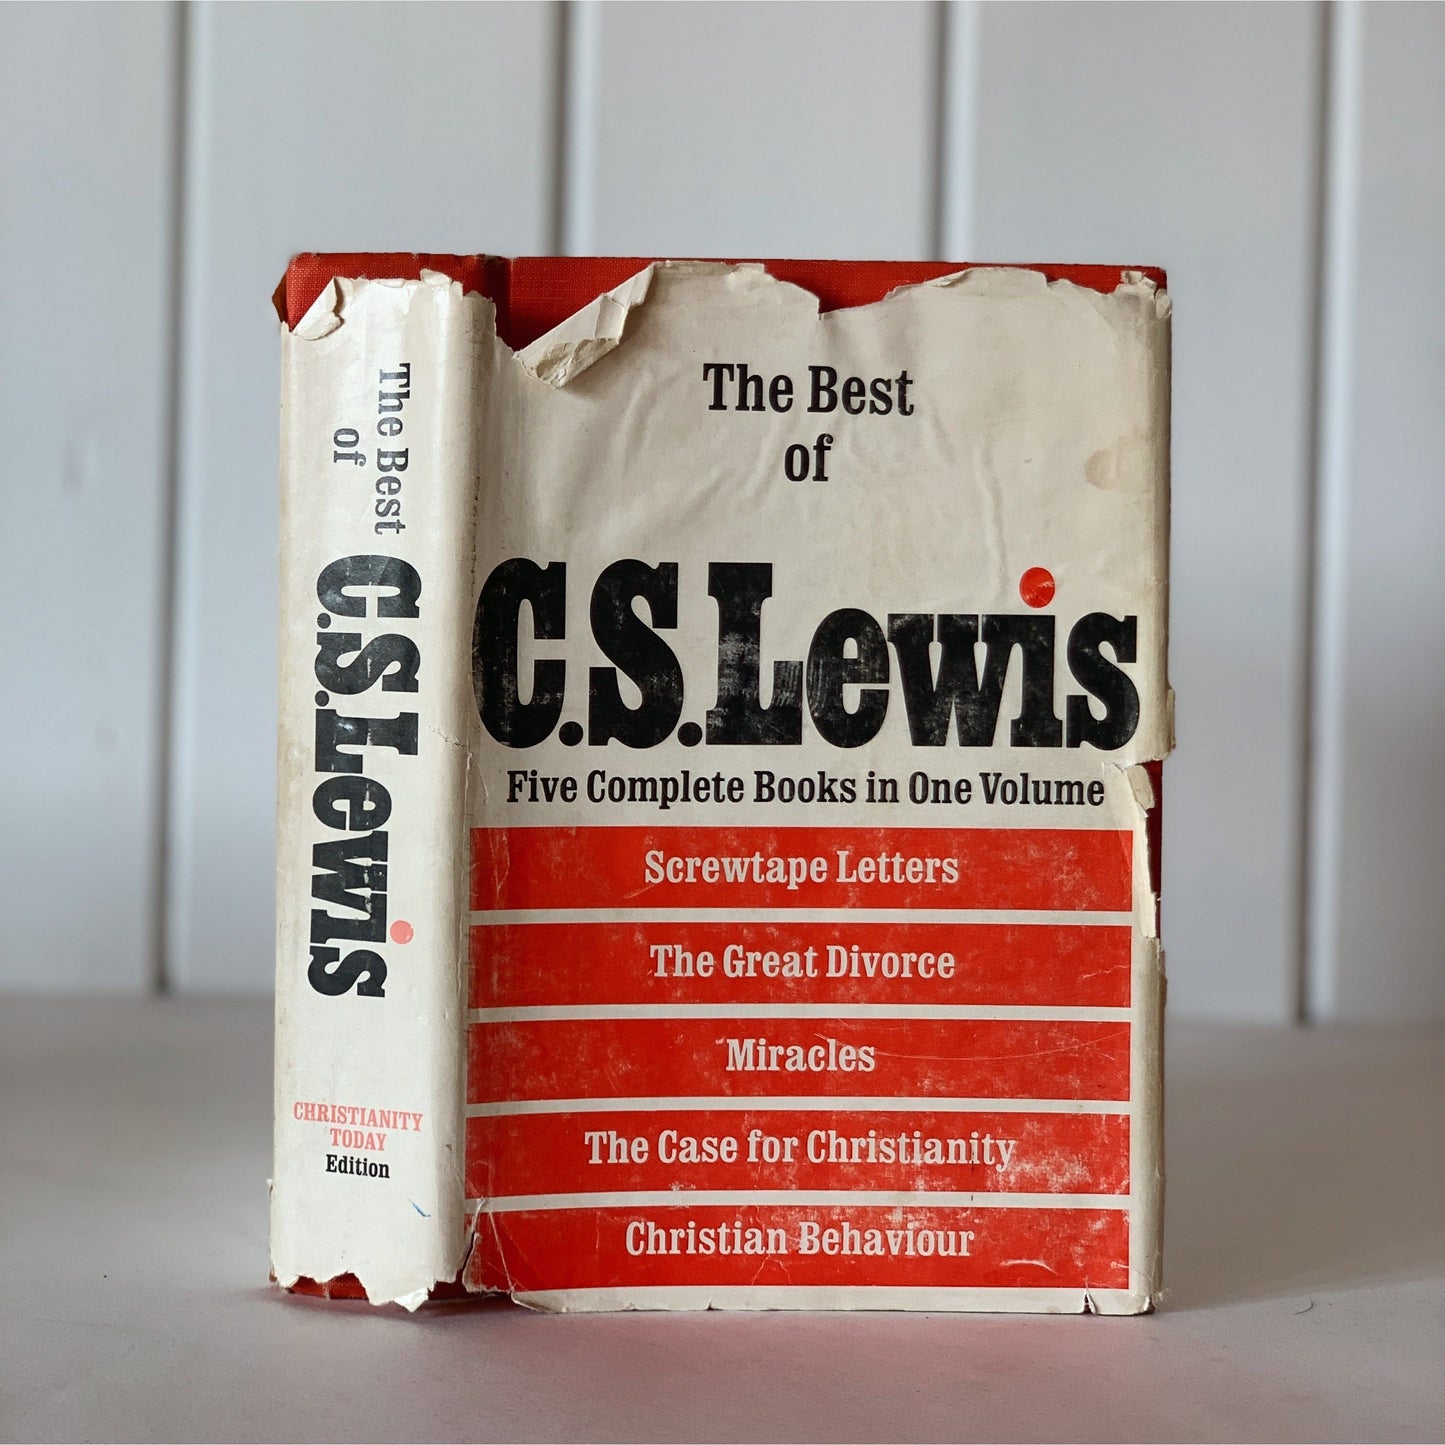 The Best of C.S. Lewis, Five Books in One Volume, 1969